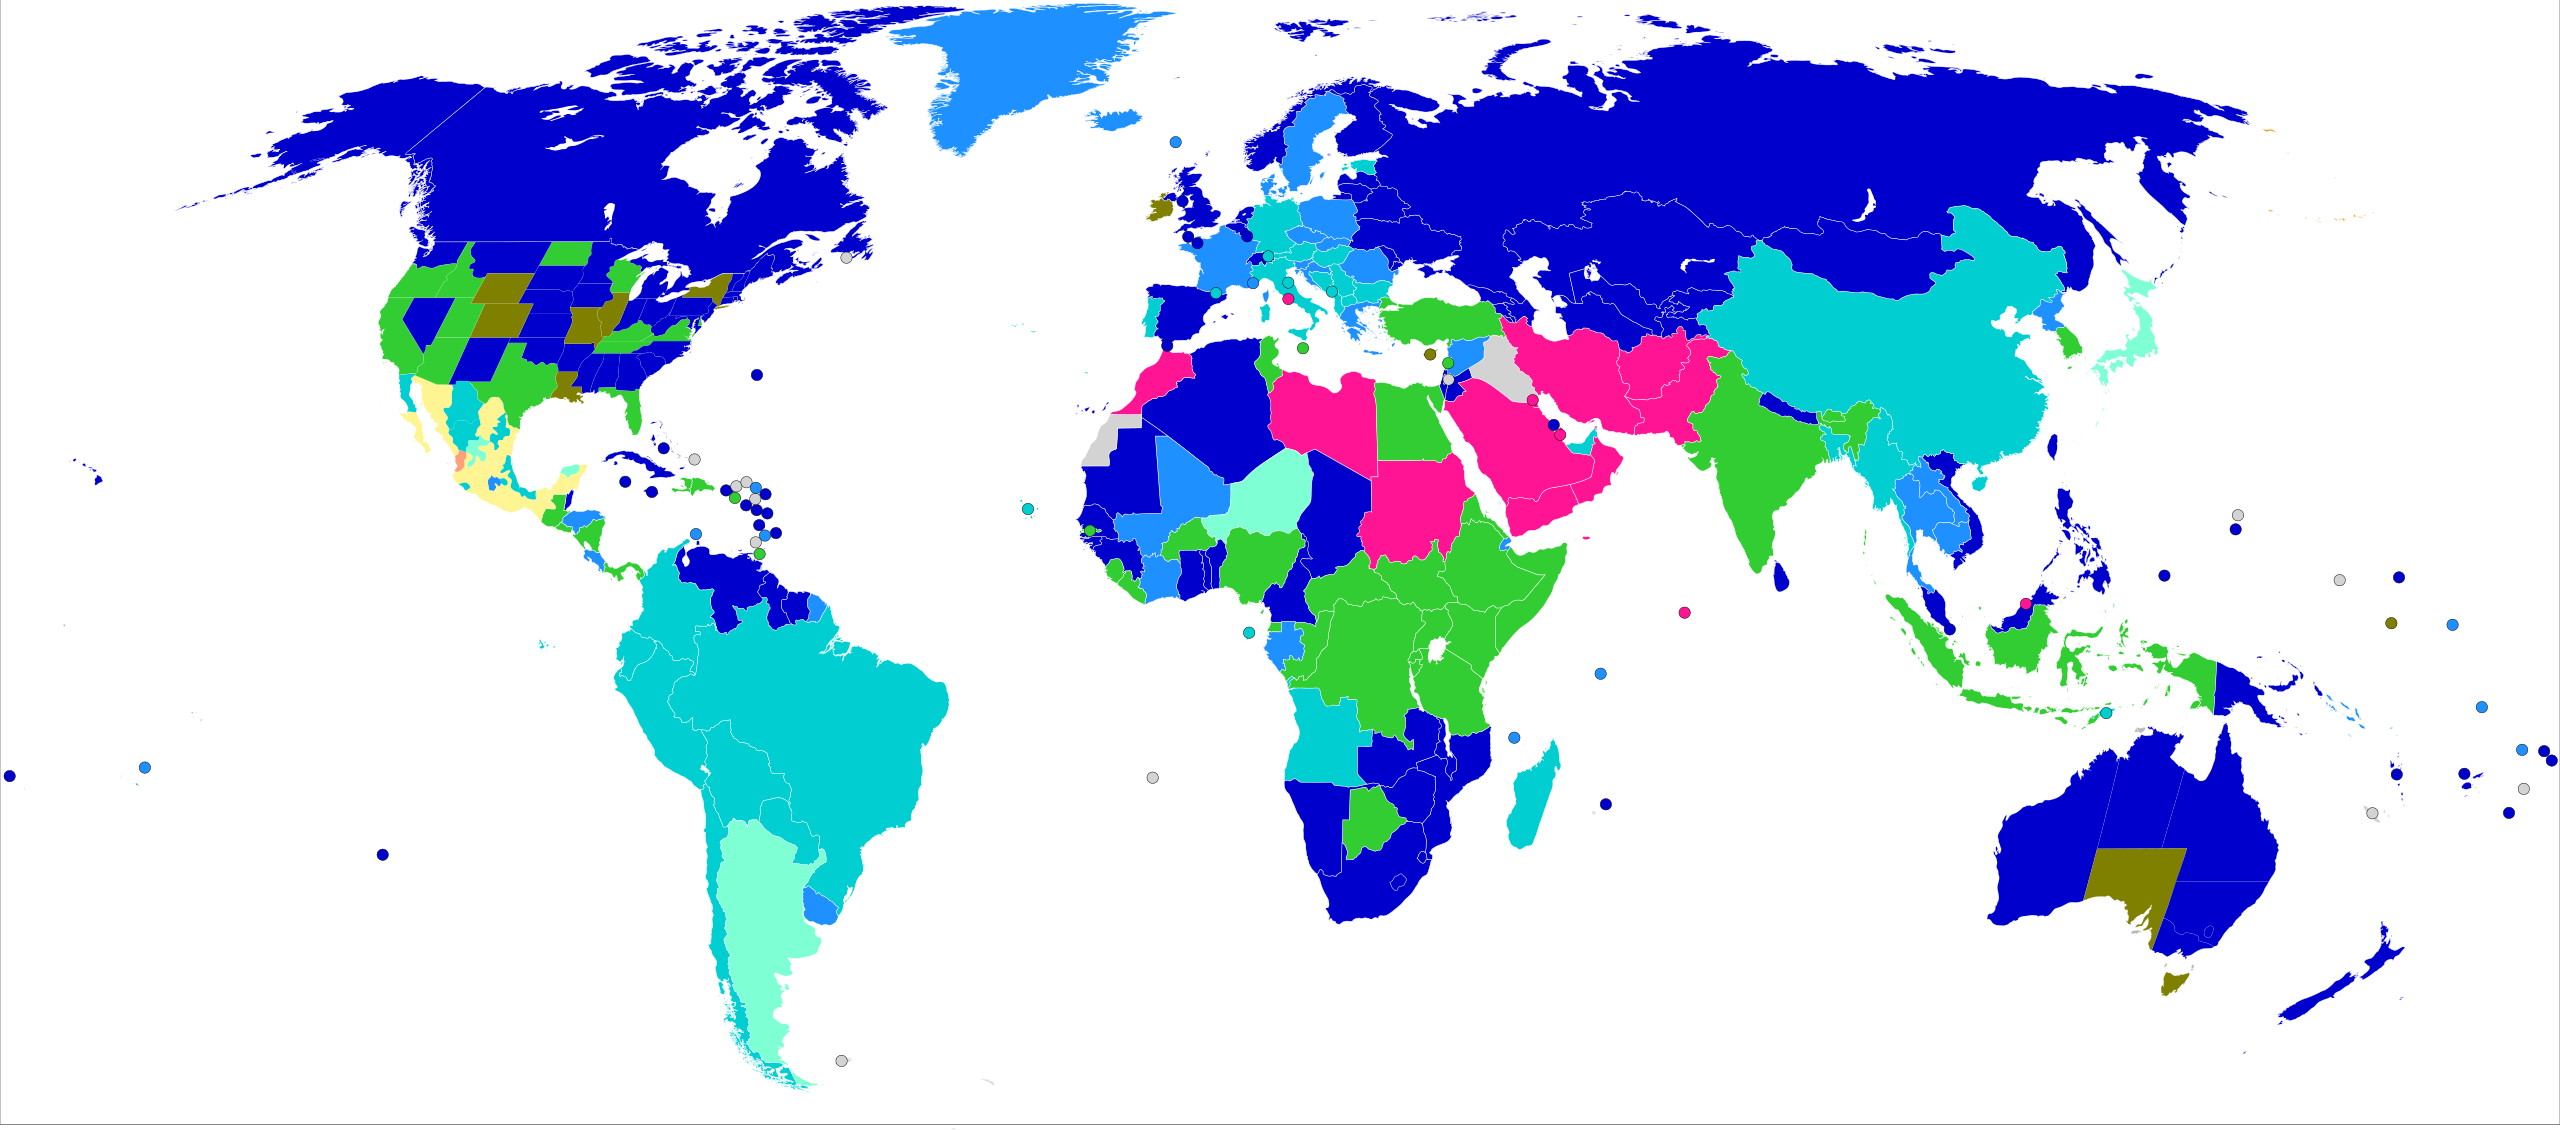 Age of sexual consent by country around the world